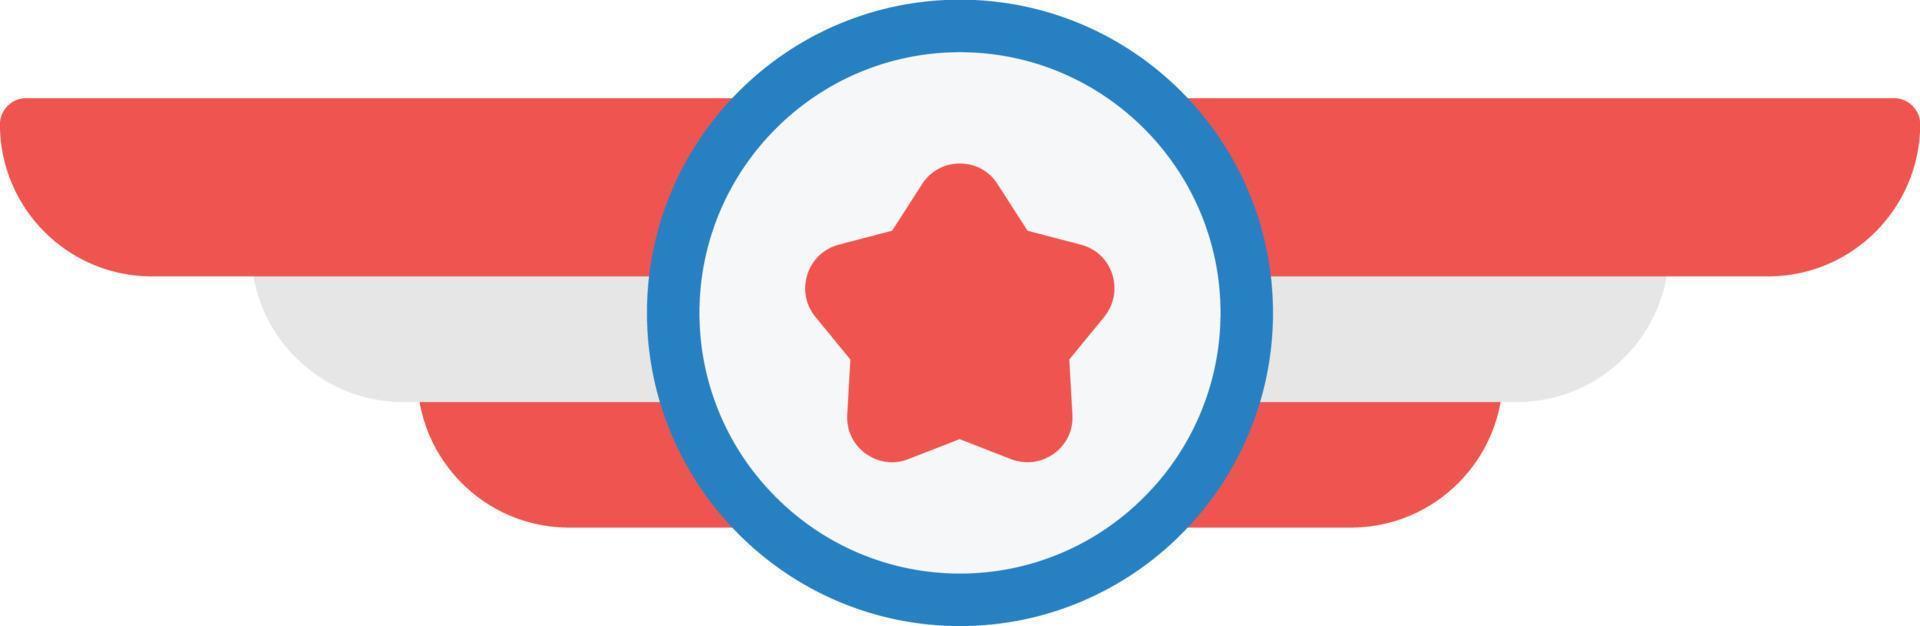 Medal Flat Icon vector